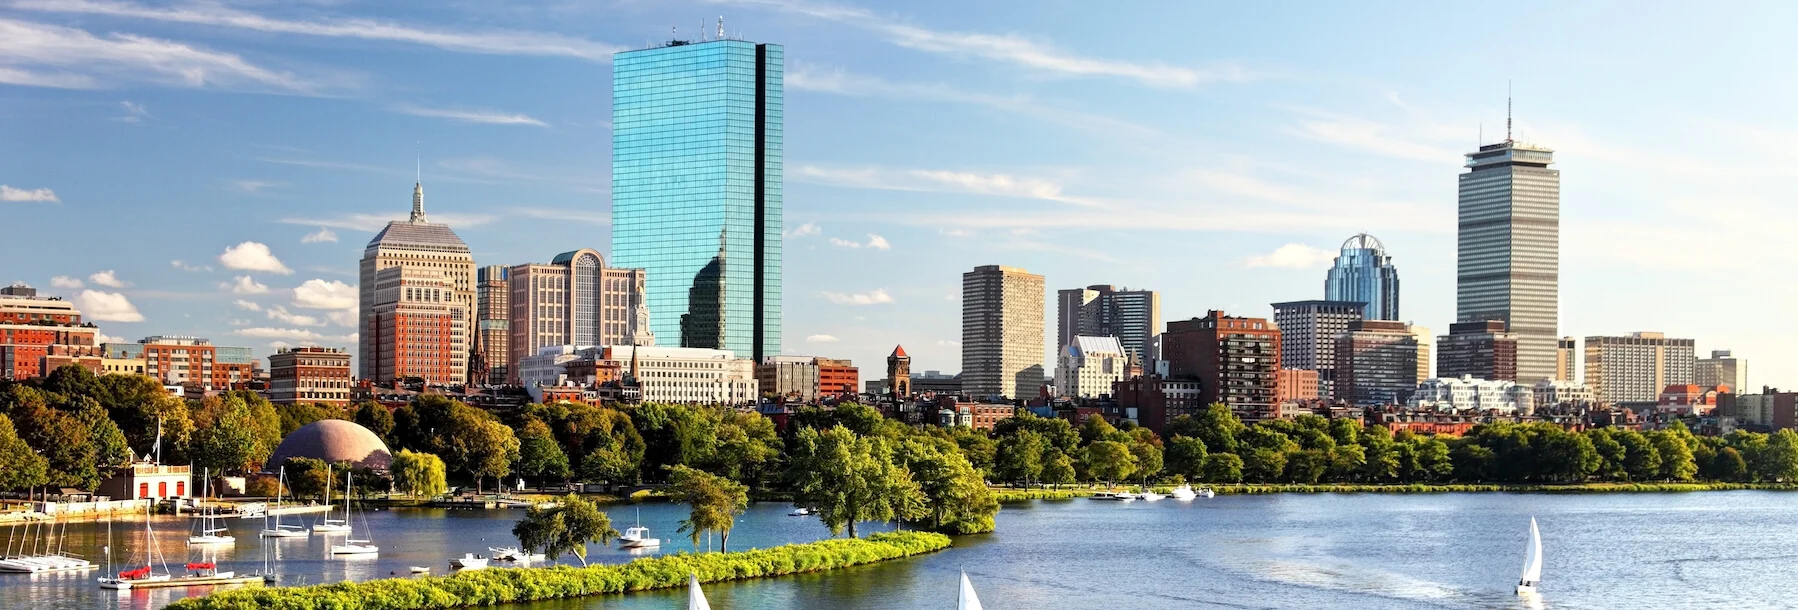 The City of Boston increases EV miles driven by 36% with Samsara EV features